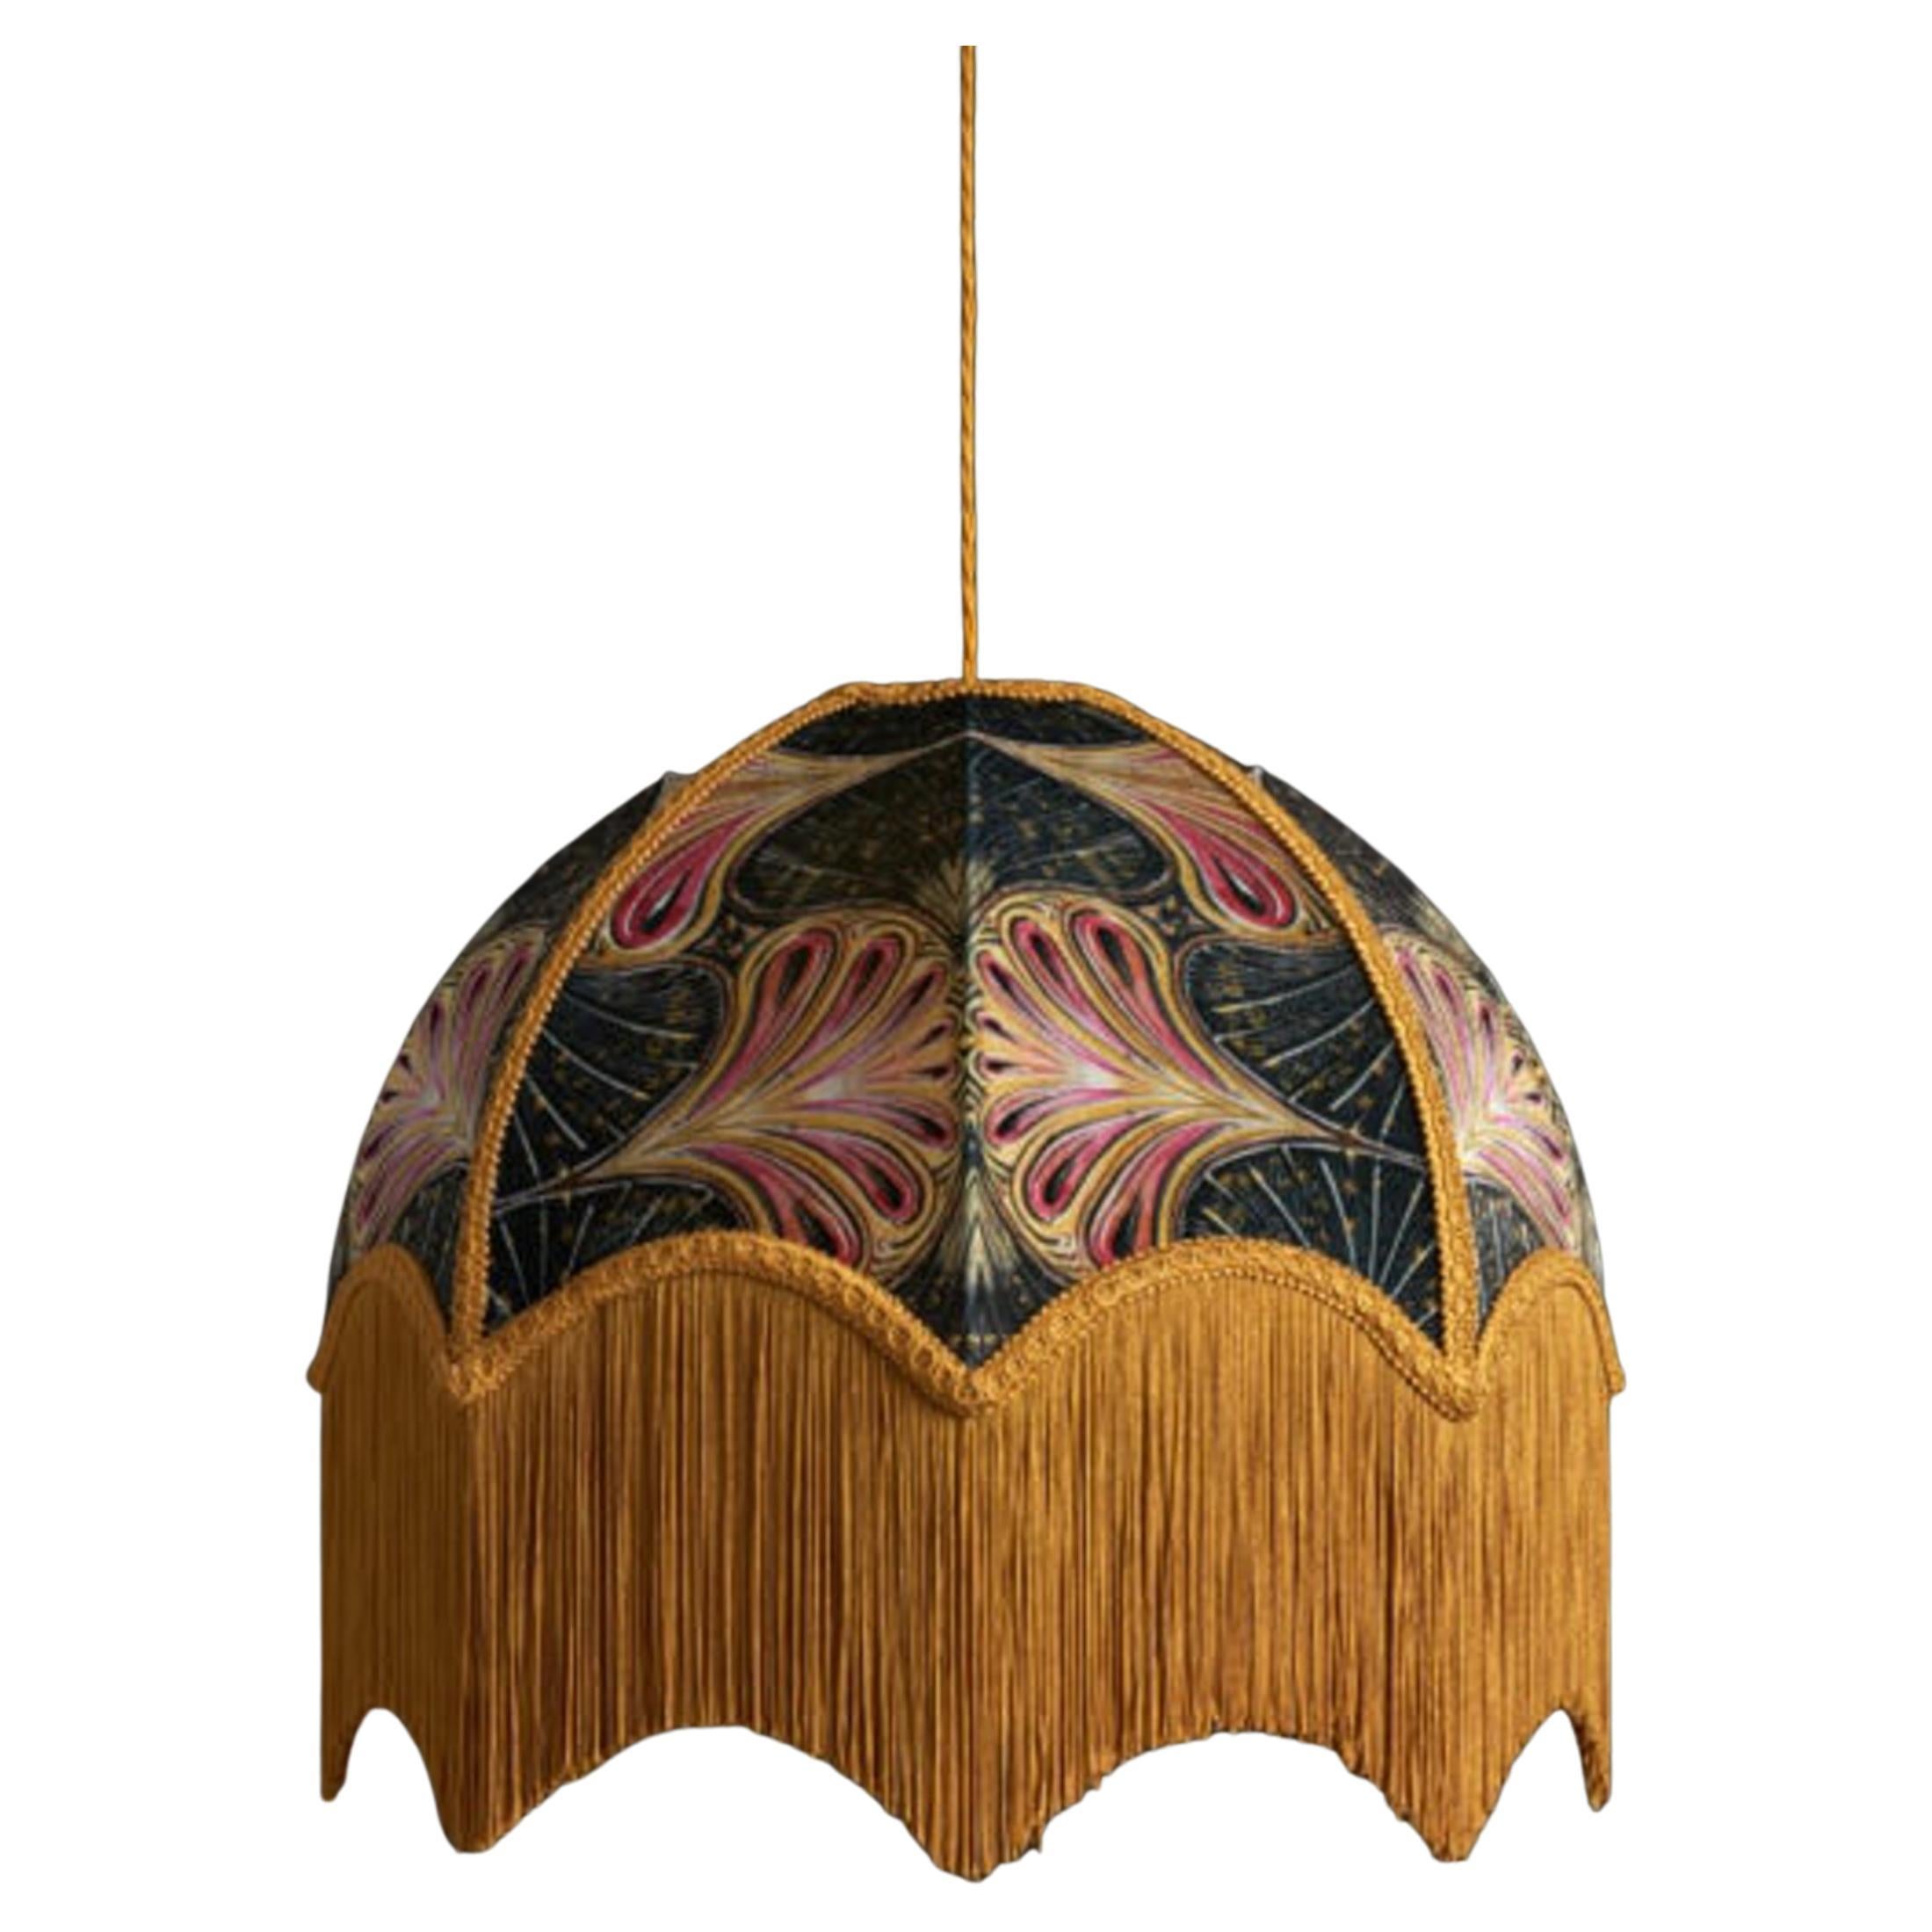 Showgirl Lampshade with Fringing - Small (14") For Sale